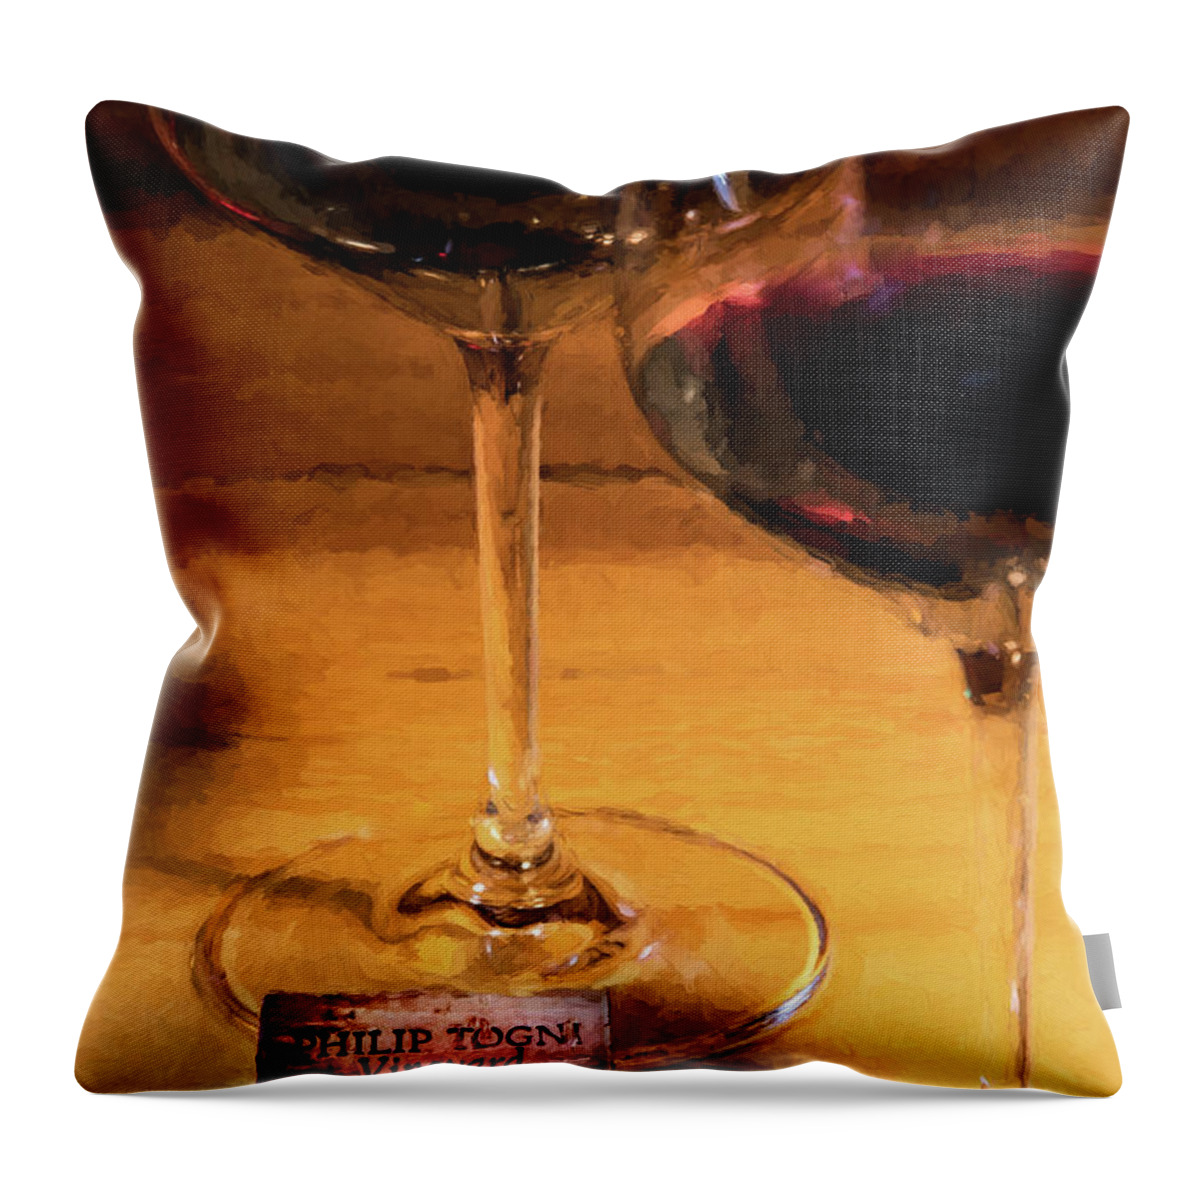 Cabernet Sauvignon Throw Pillow featuring the photograph Togni Wine 3 by David Letts